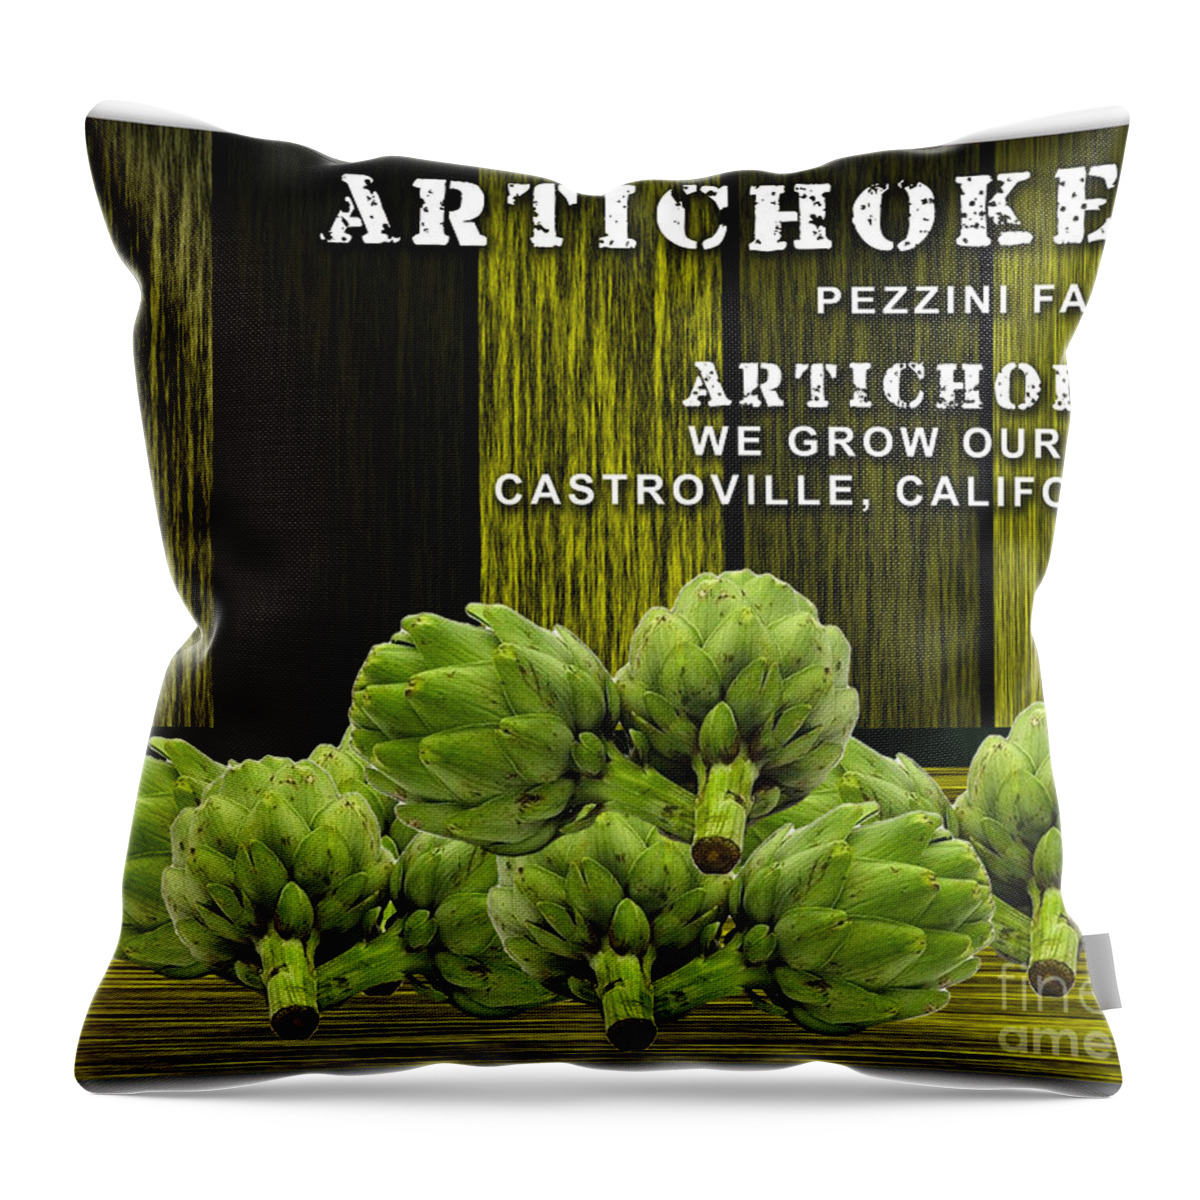 Artichokes Mixed Media Mixed Media Mixed Media Throw Pillow featuring the mixed media Artichokes Farm #3 by Marvin Blaine